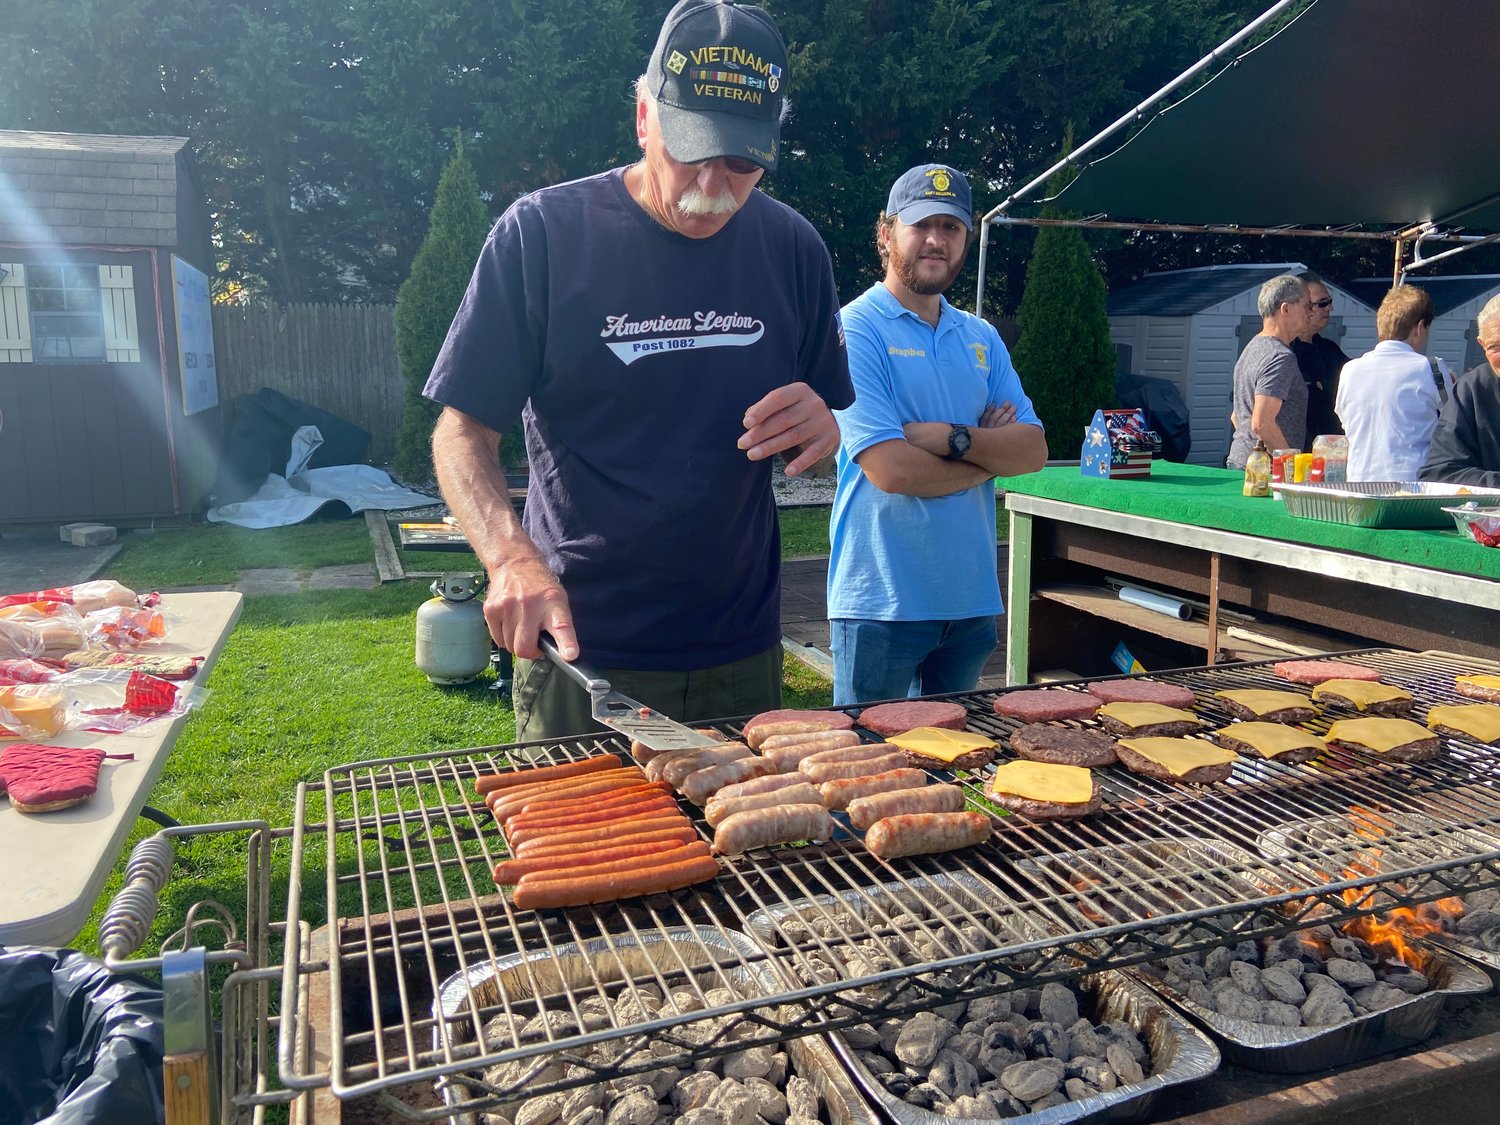 Dan Carbonare cooked up some burgers and dogs while Steven Papagni lent a helping hand.